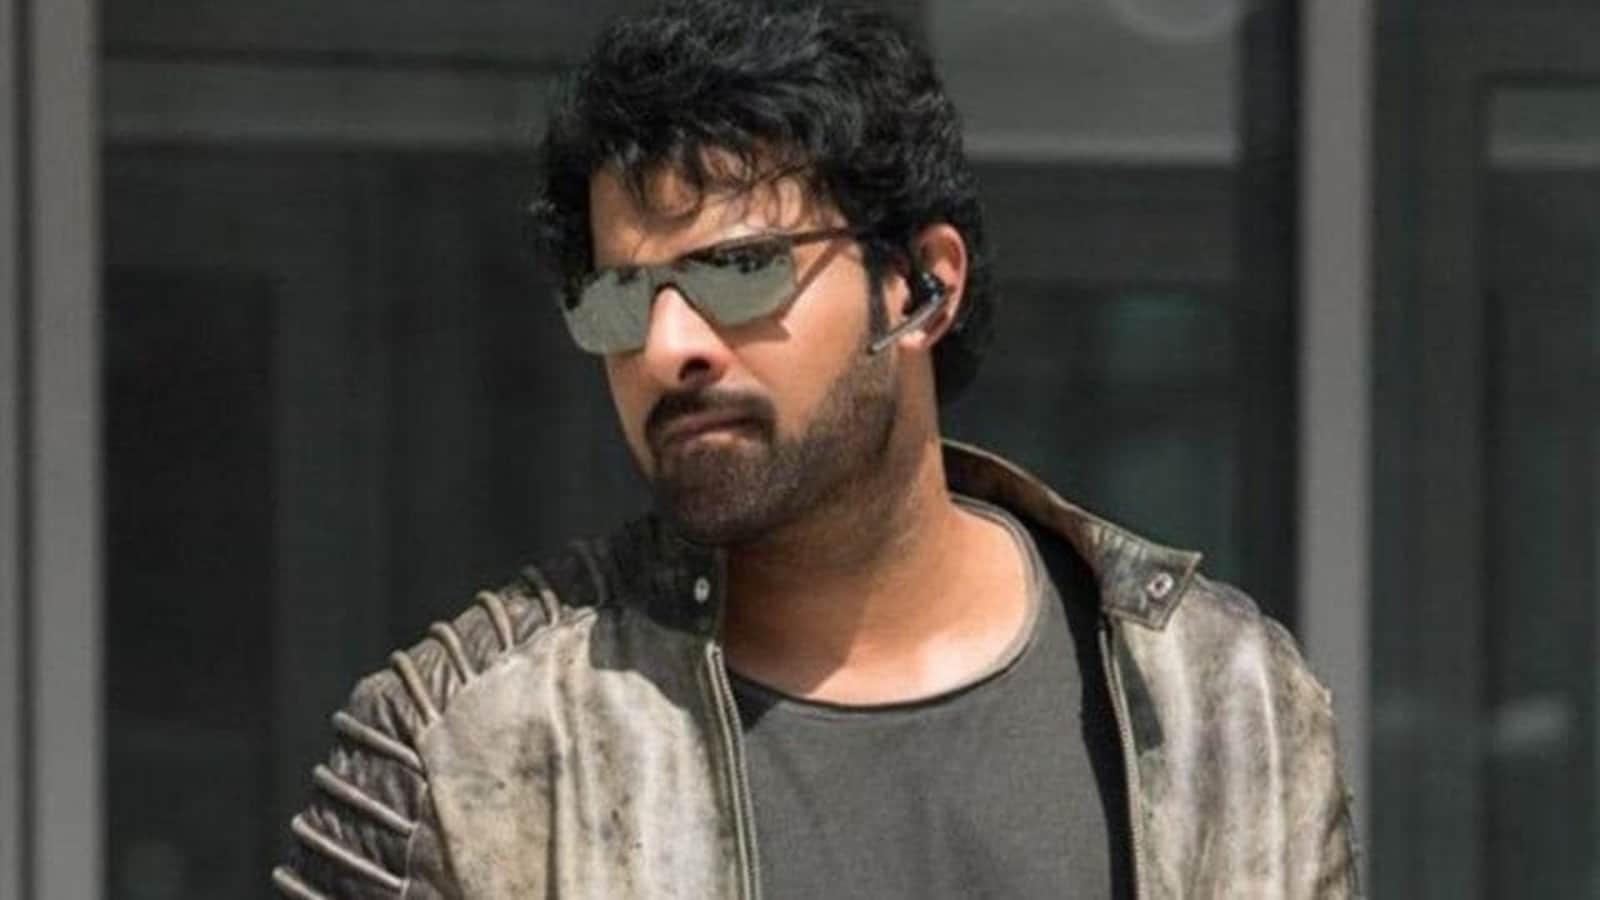 Mission Impossible 7 director Christopher McQuarrie reacts to reports of Prabhas starring in film